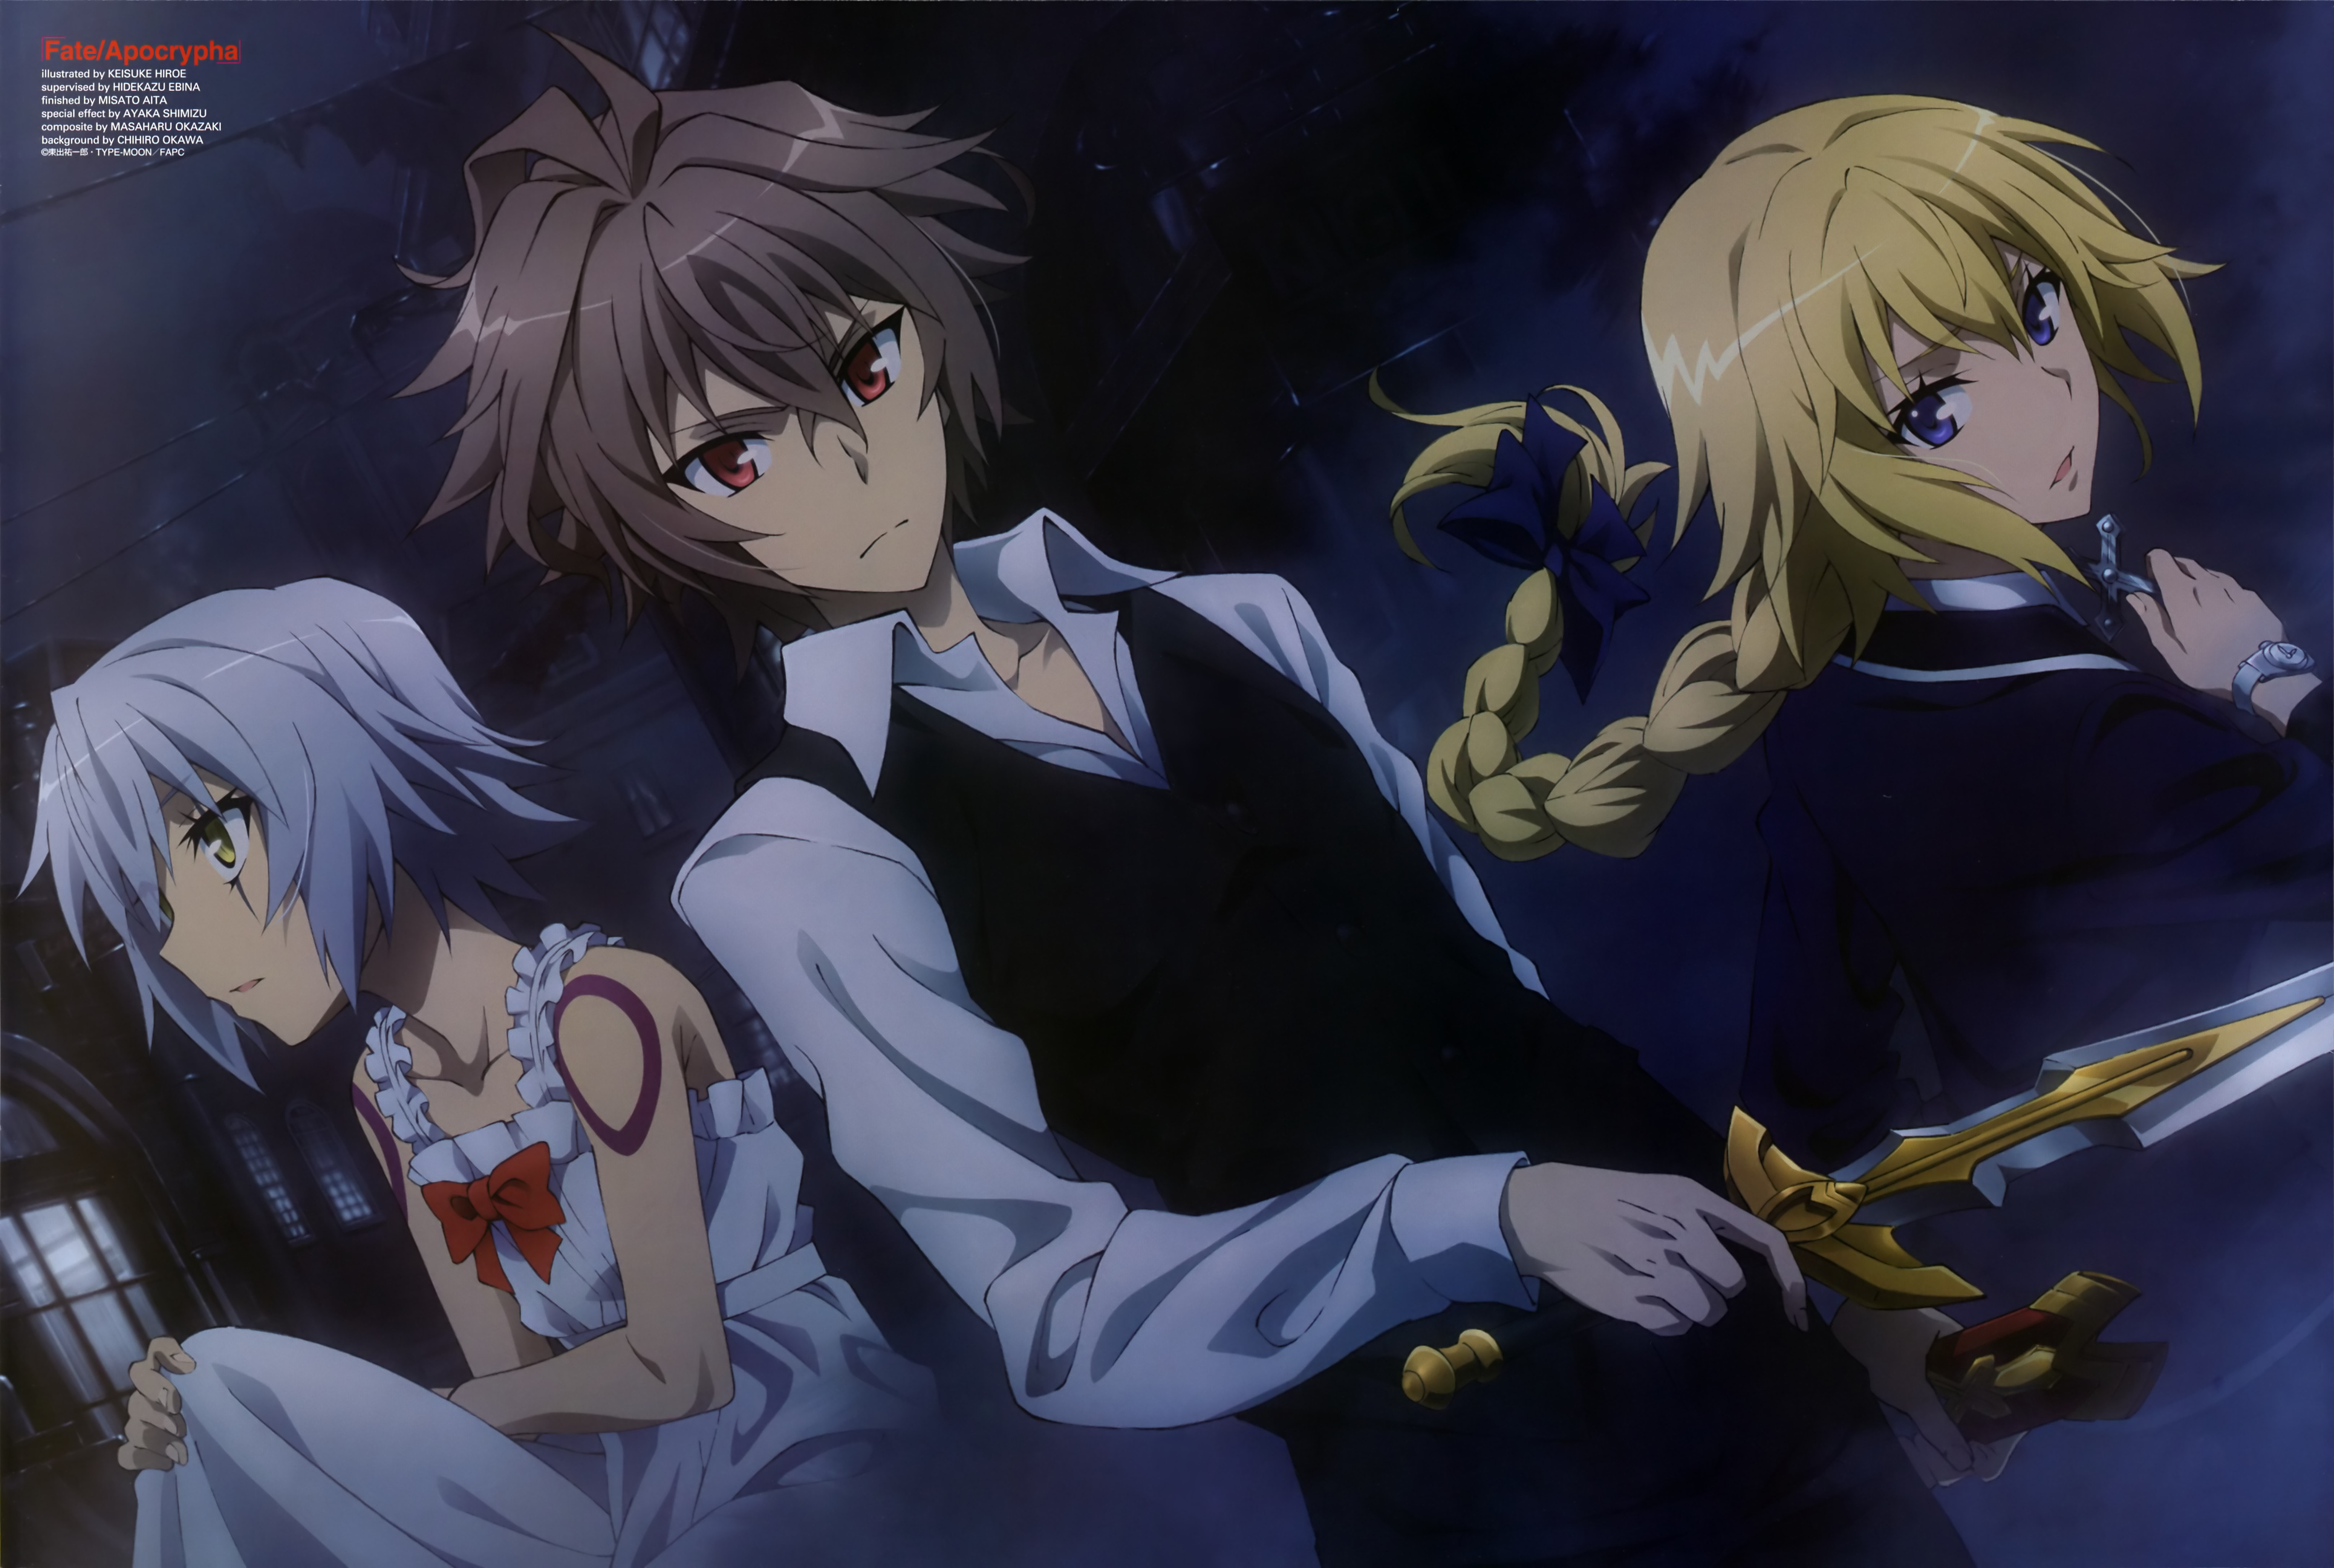 Download Sieg Fateapocrypha Assassin Of Black Fateapocrypha Jack The Ripper Fate